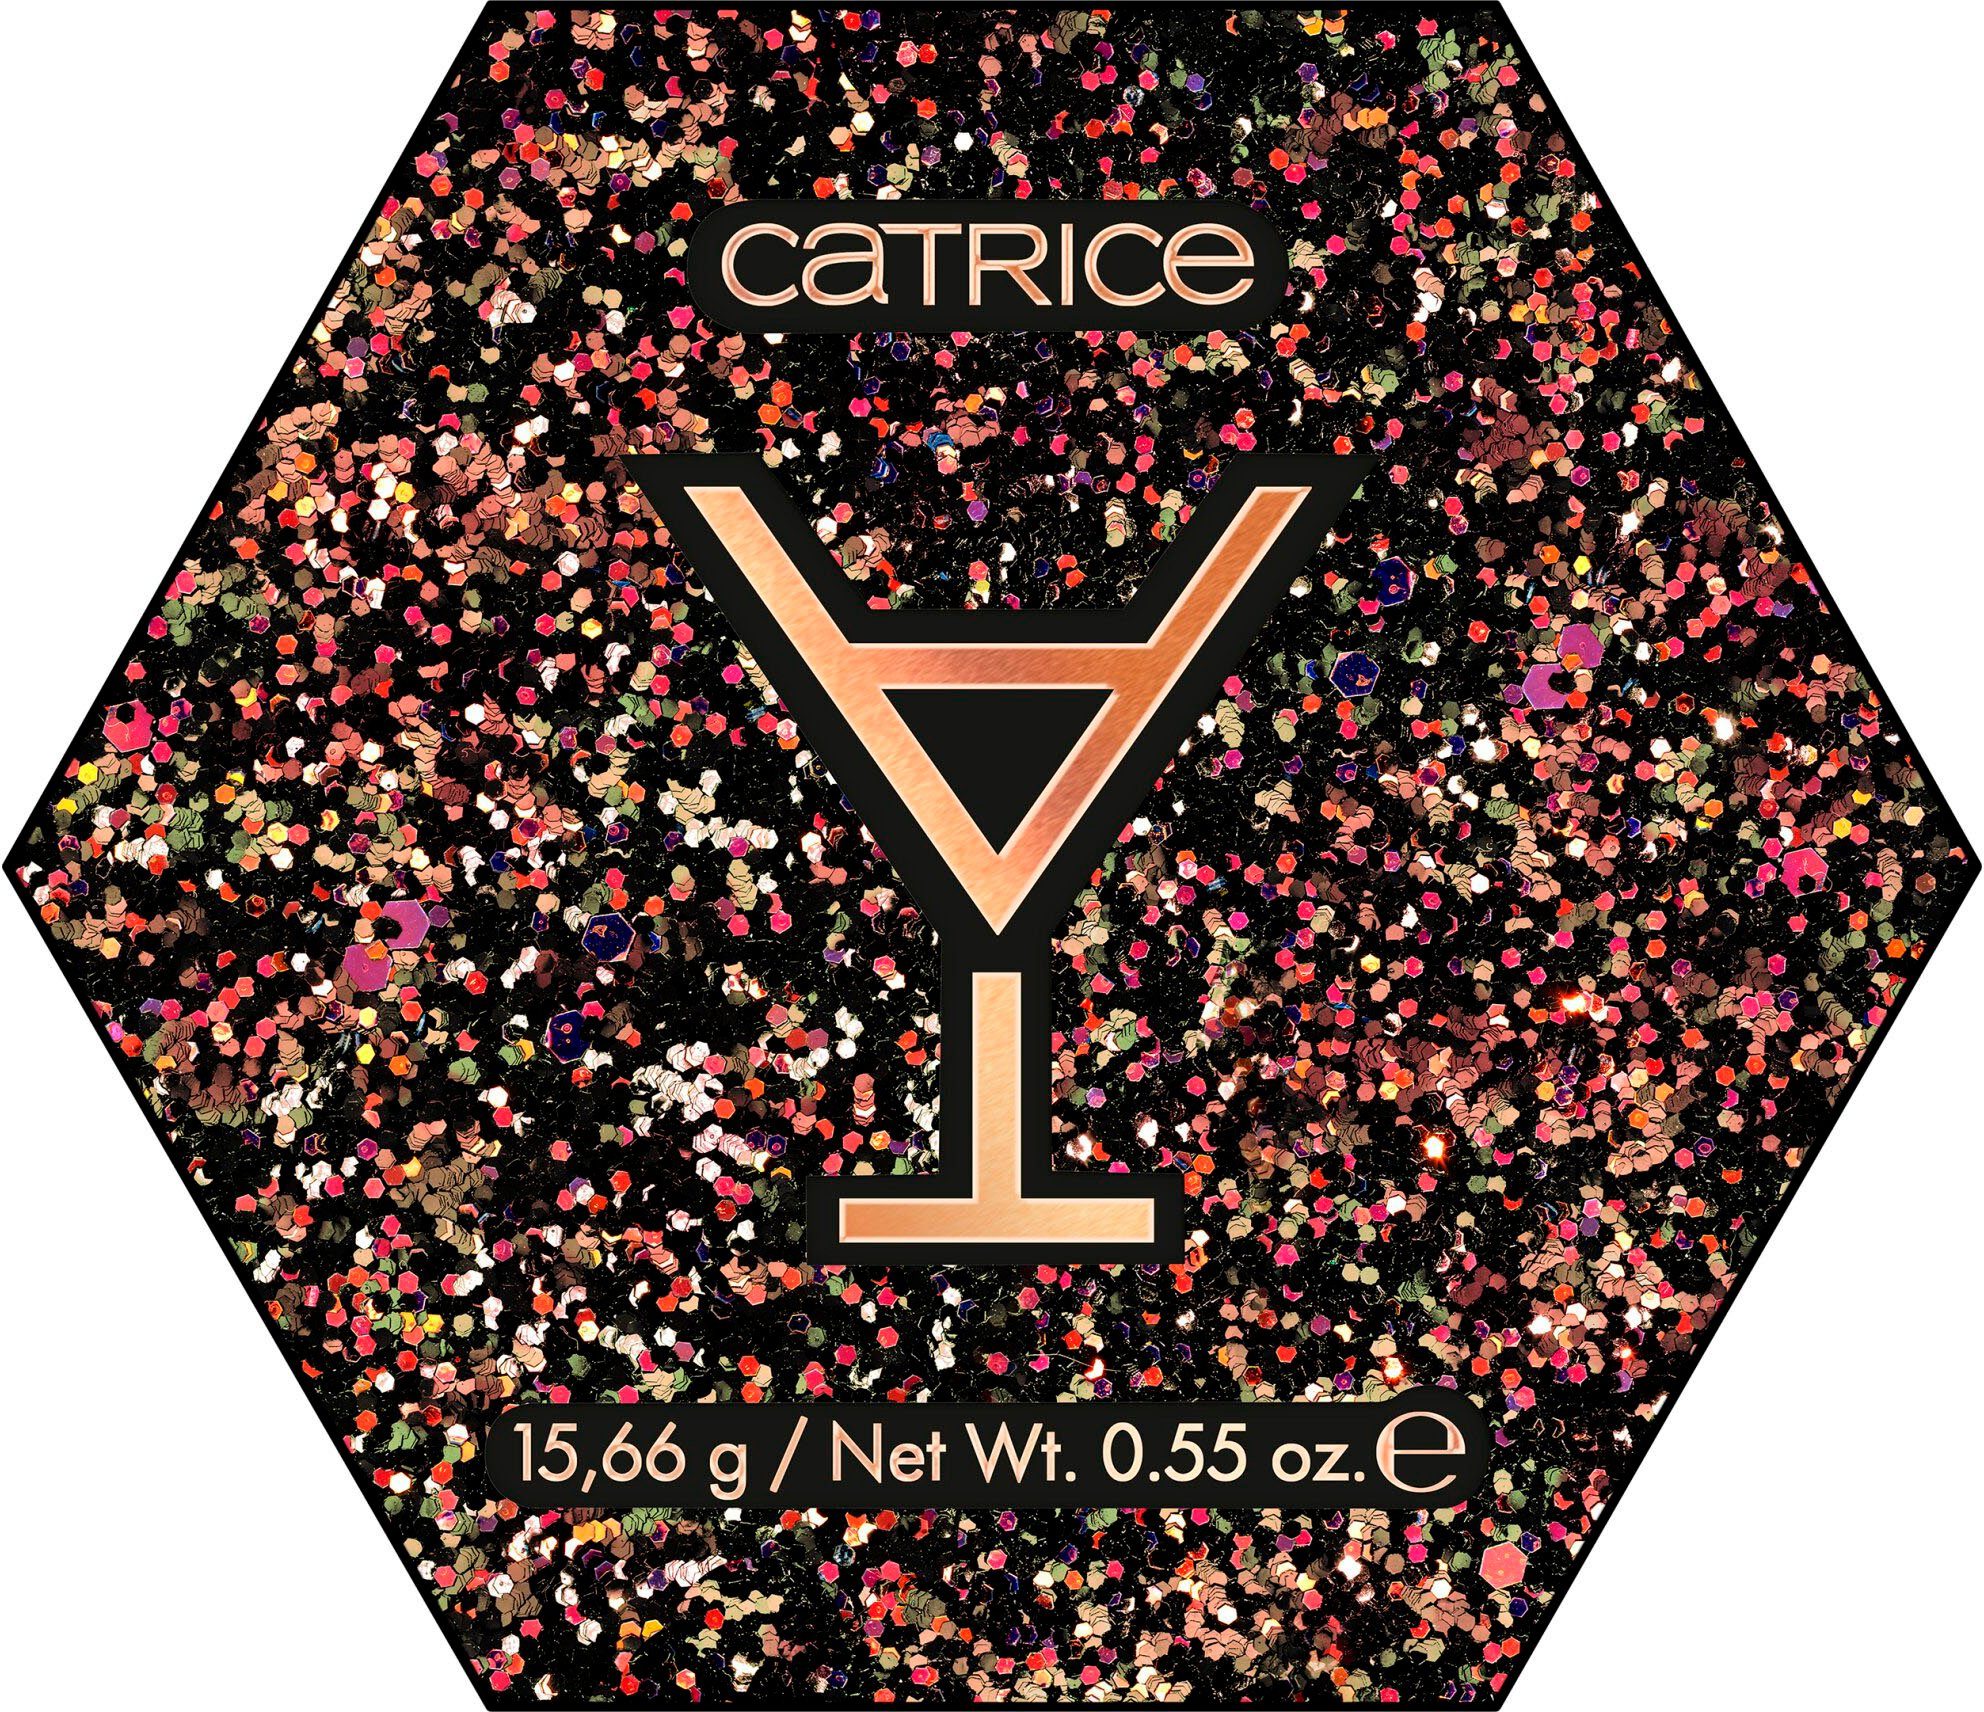 Catrice Highlighter-Palette ABOUT Palette Highlighter TONIGHT